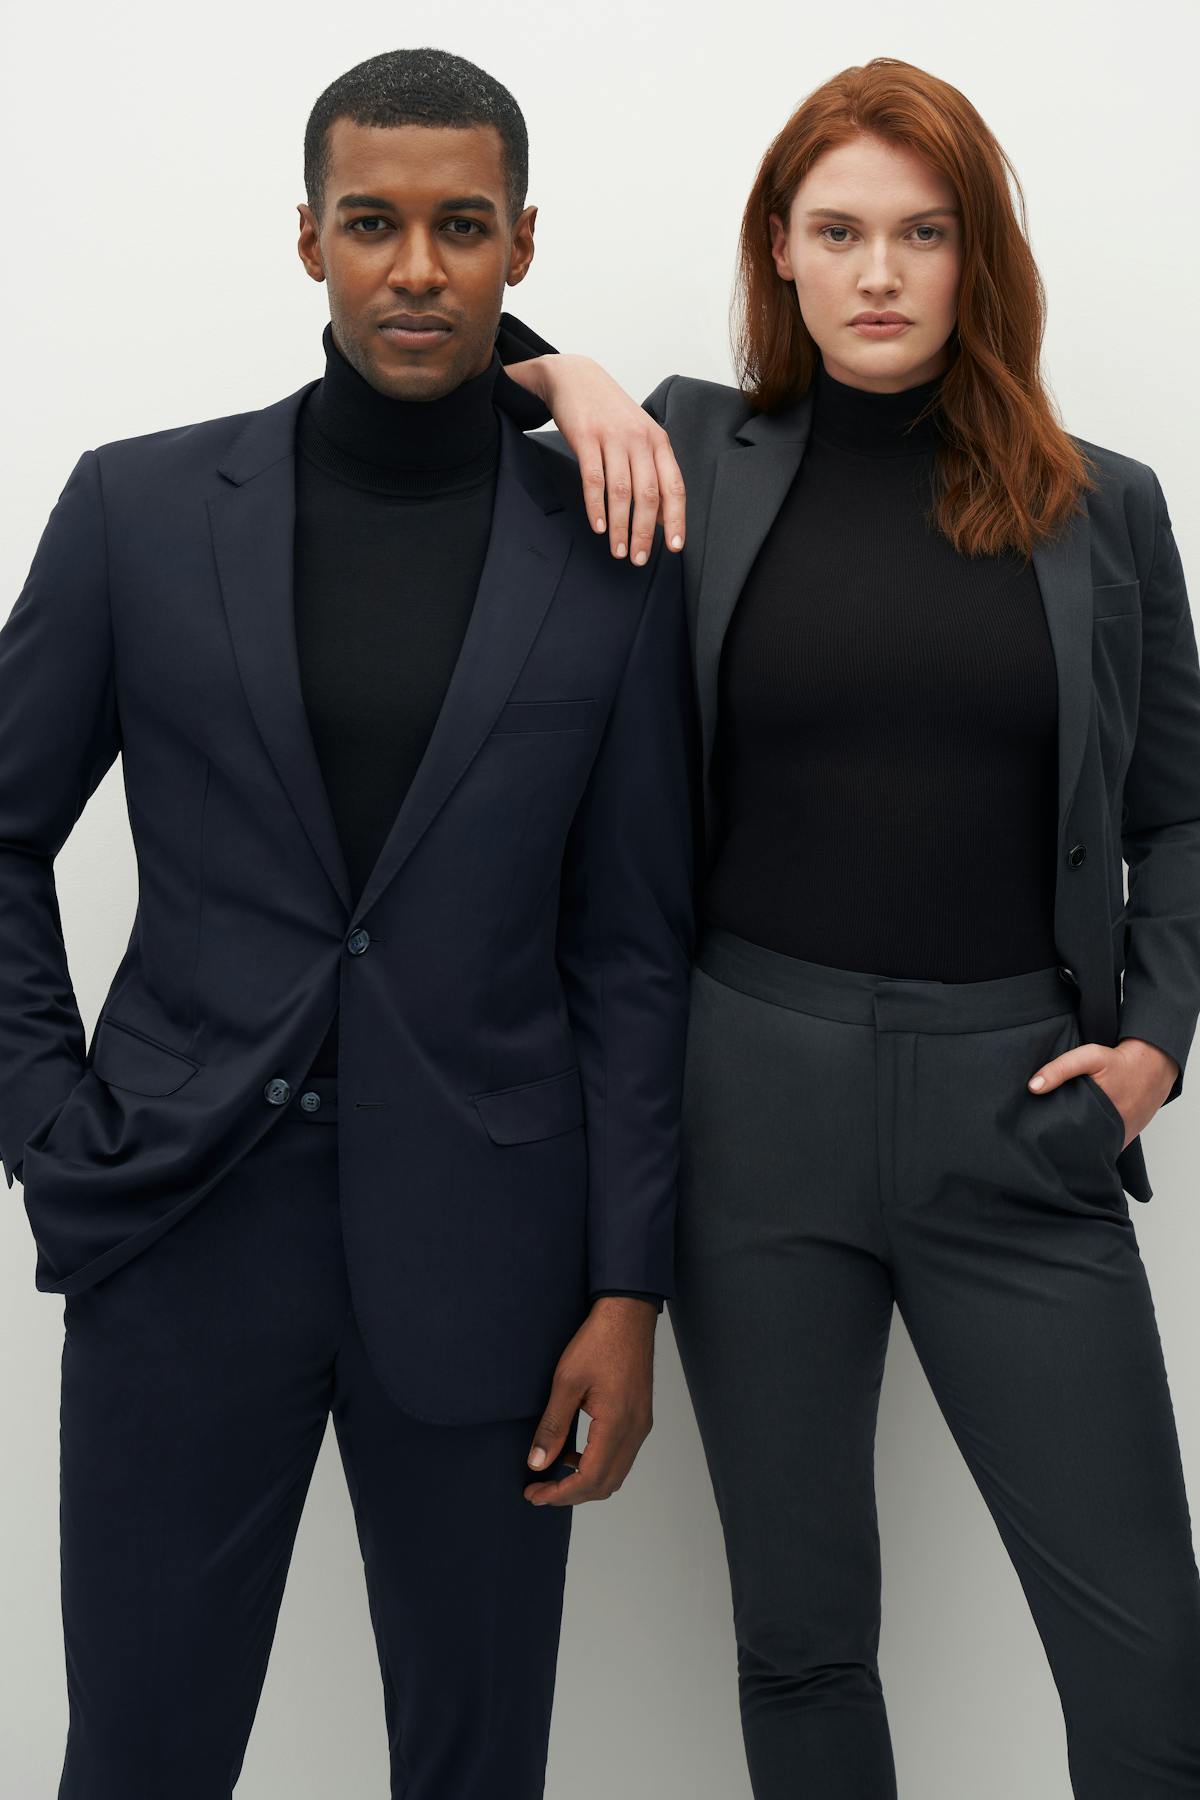 turtlenecks and suits